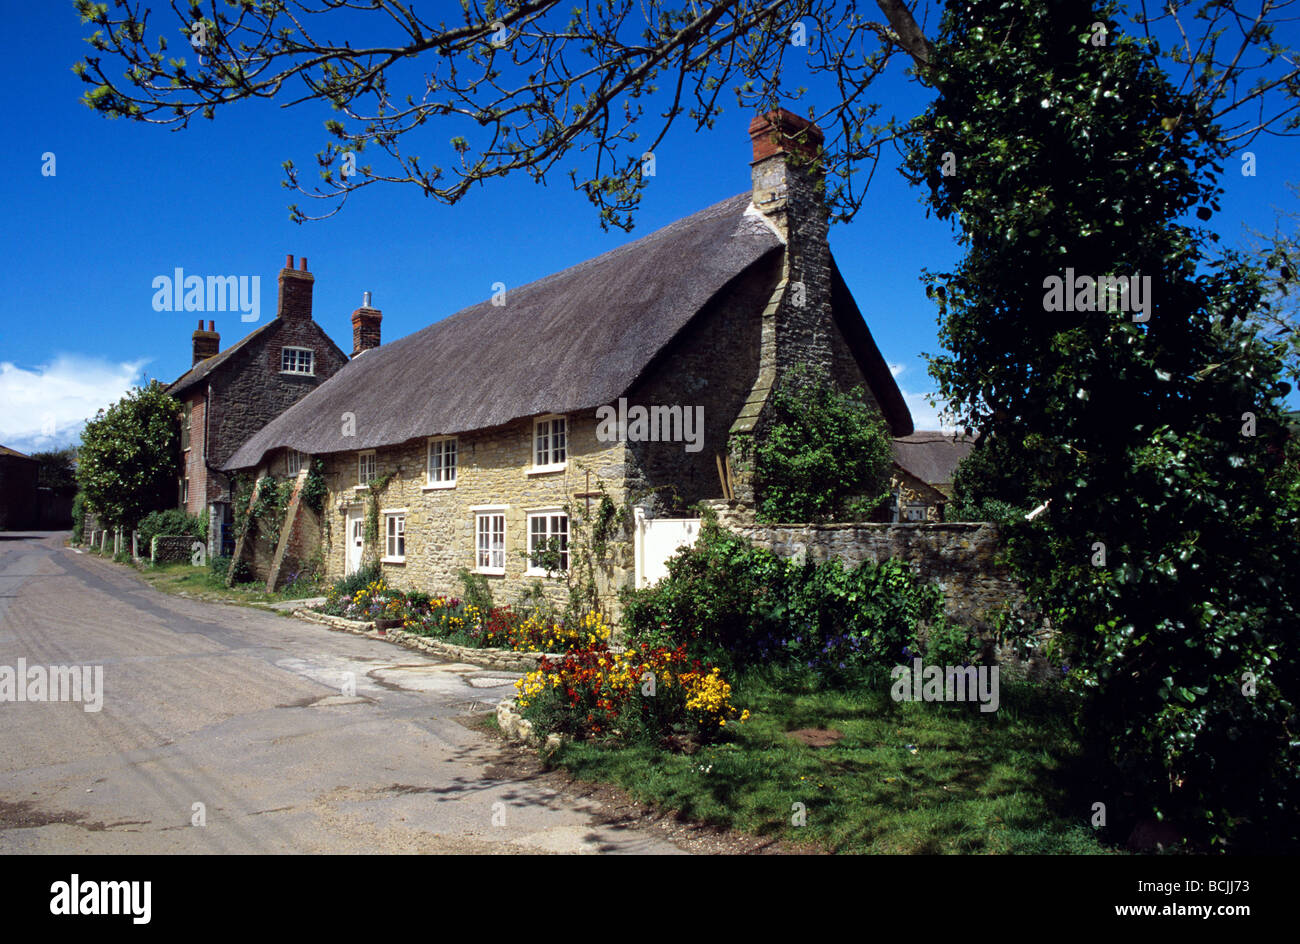 Thatched Cottage In The Picturesque Dorset Village Of Burton Stock